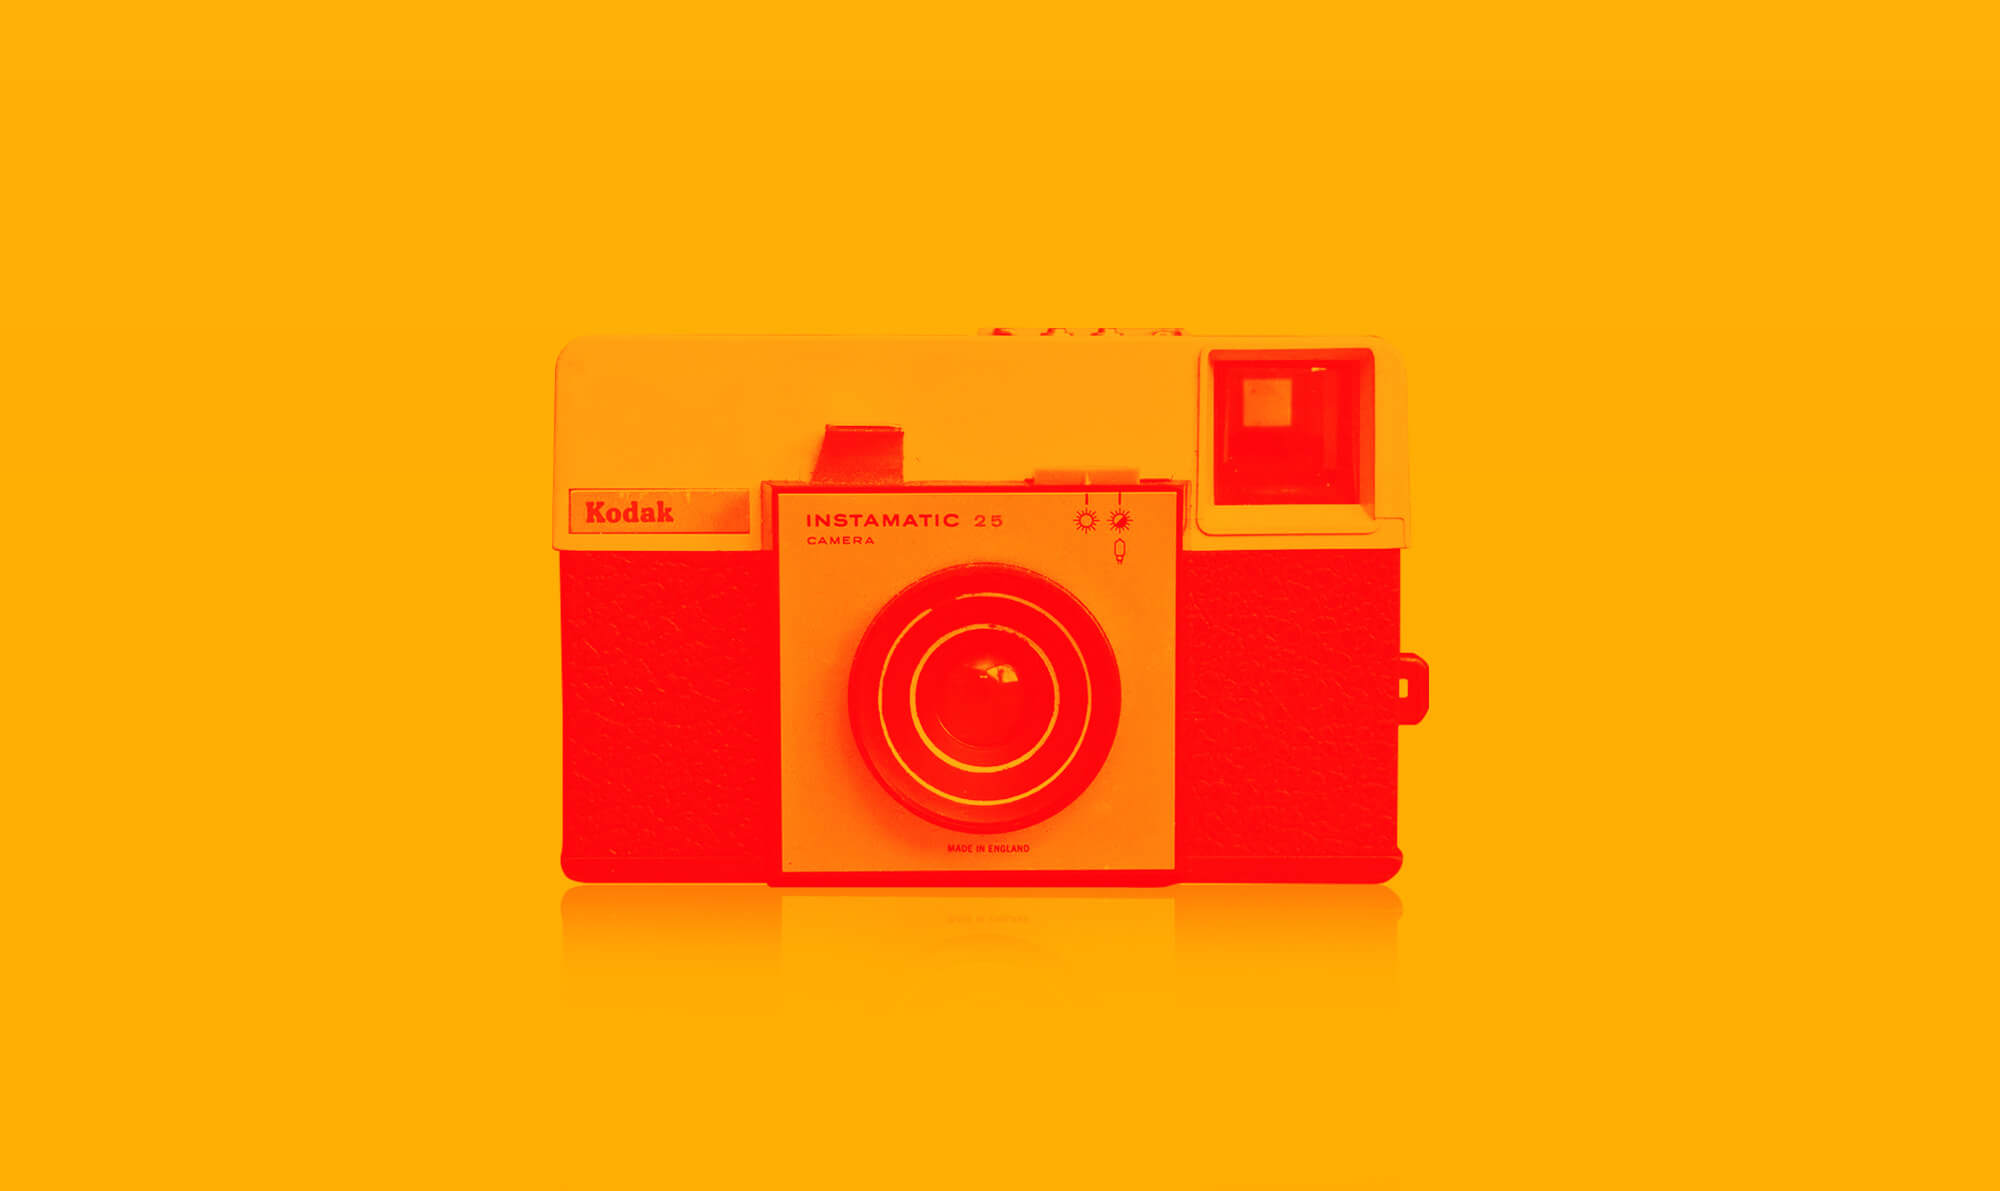 Kodak: Branding that lasts for more than just a moment.